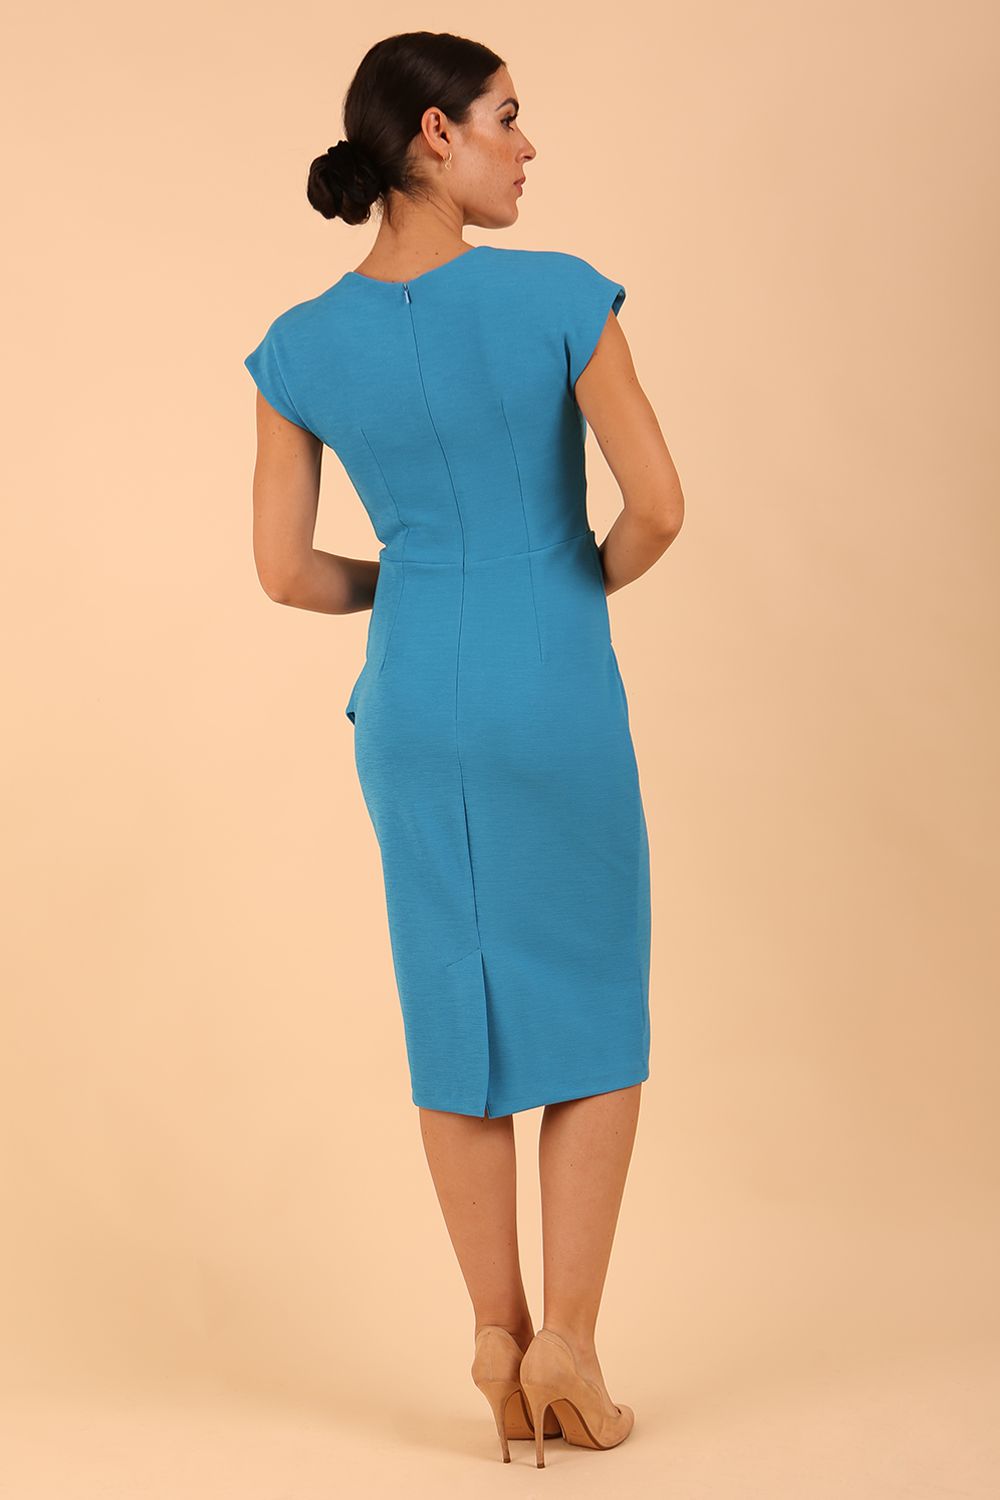 model is wearing diva catwalk Ester cap sleeve pencil dress with v-neck and bow detail at the front in malibu blue back